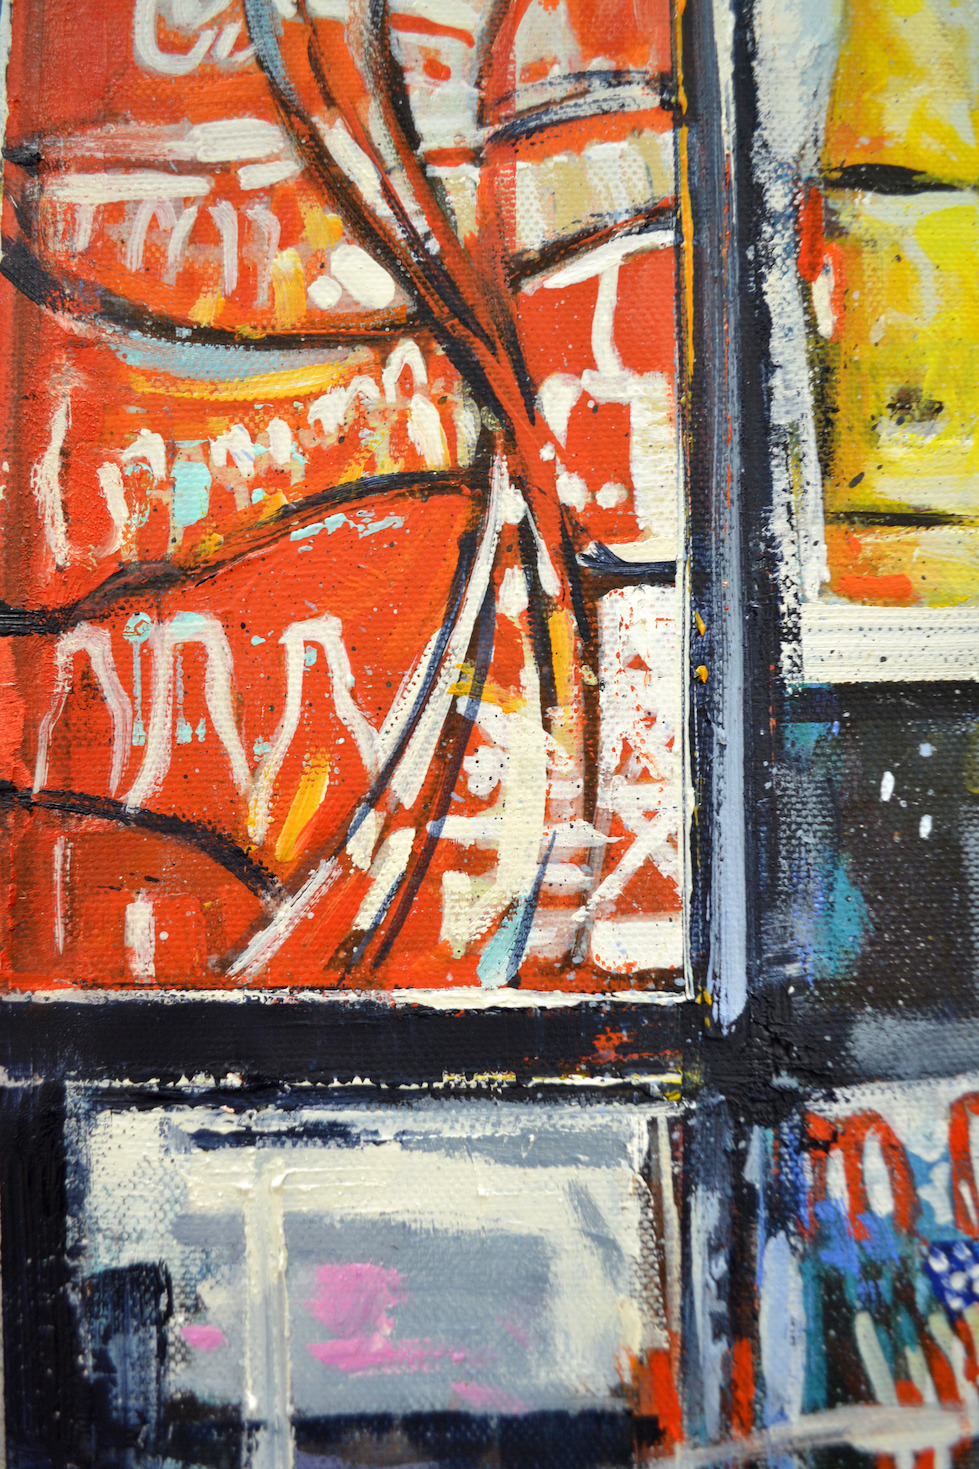 Close Up Detail 1 Of Acrylic Painting "Time Square Intersection" By Judith Dalozzo